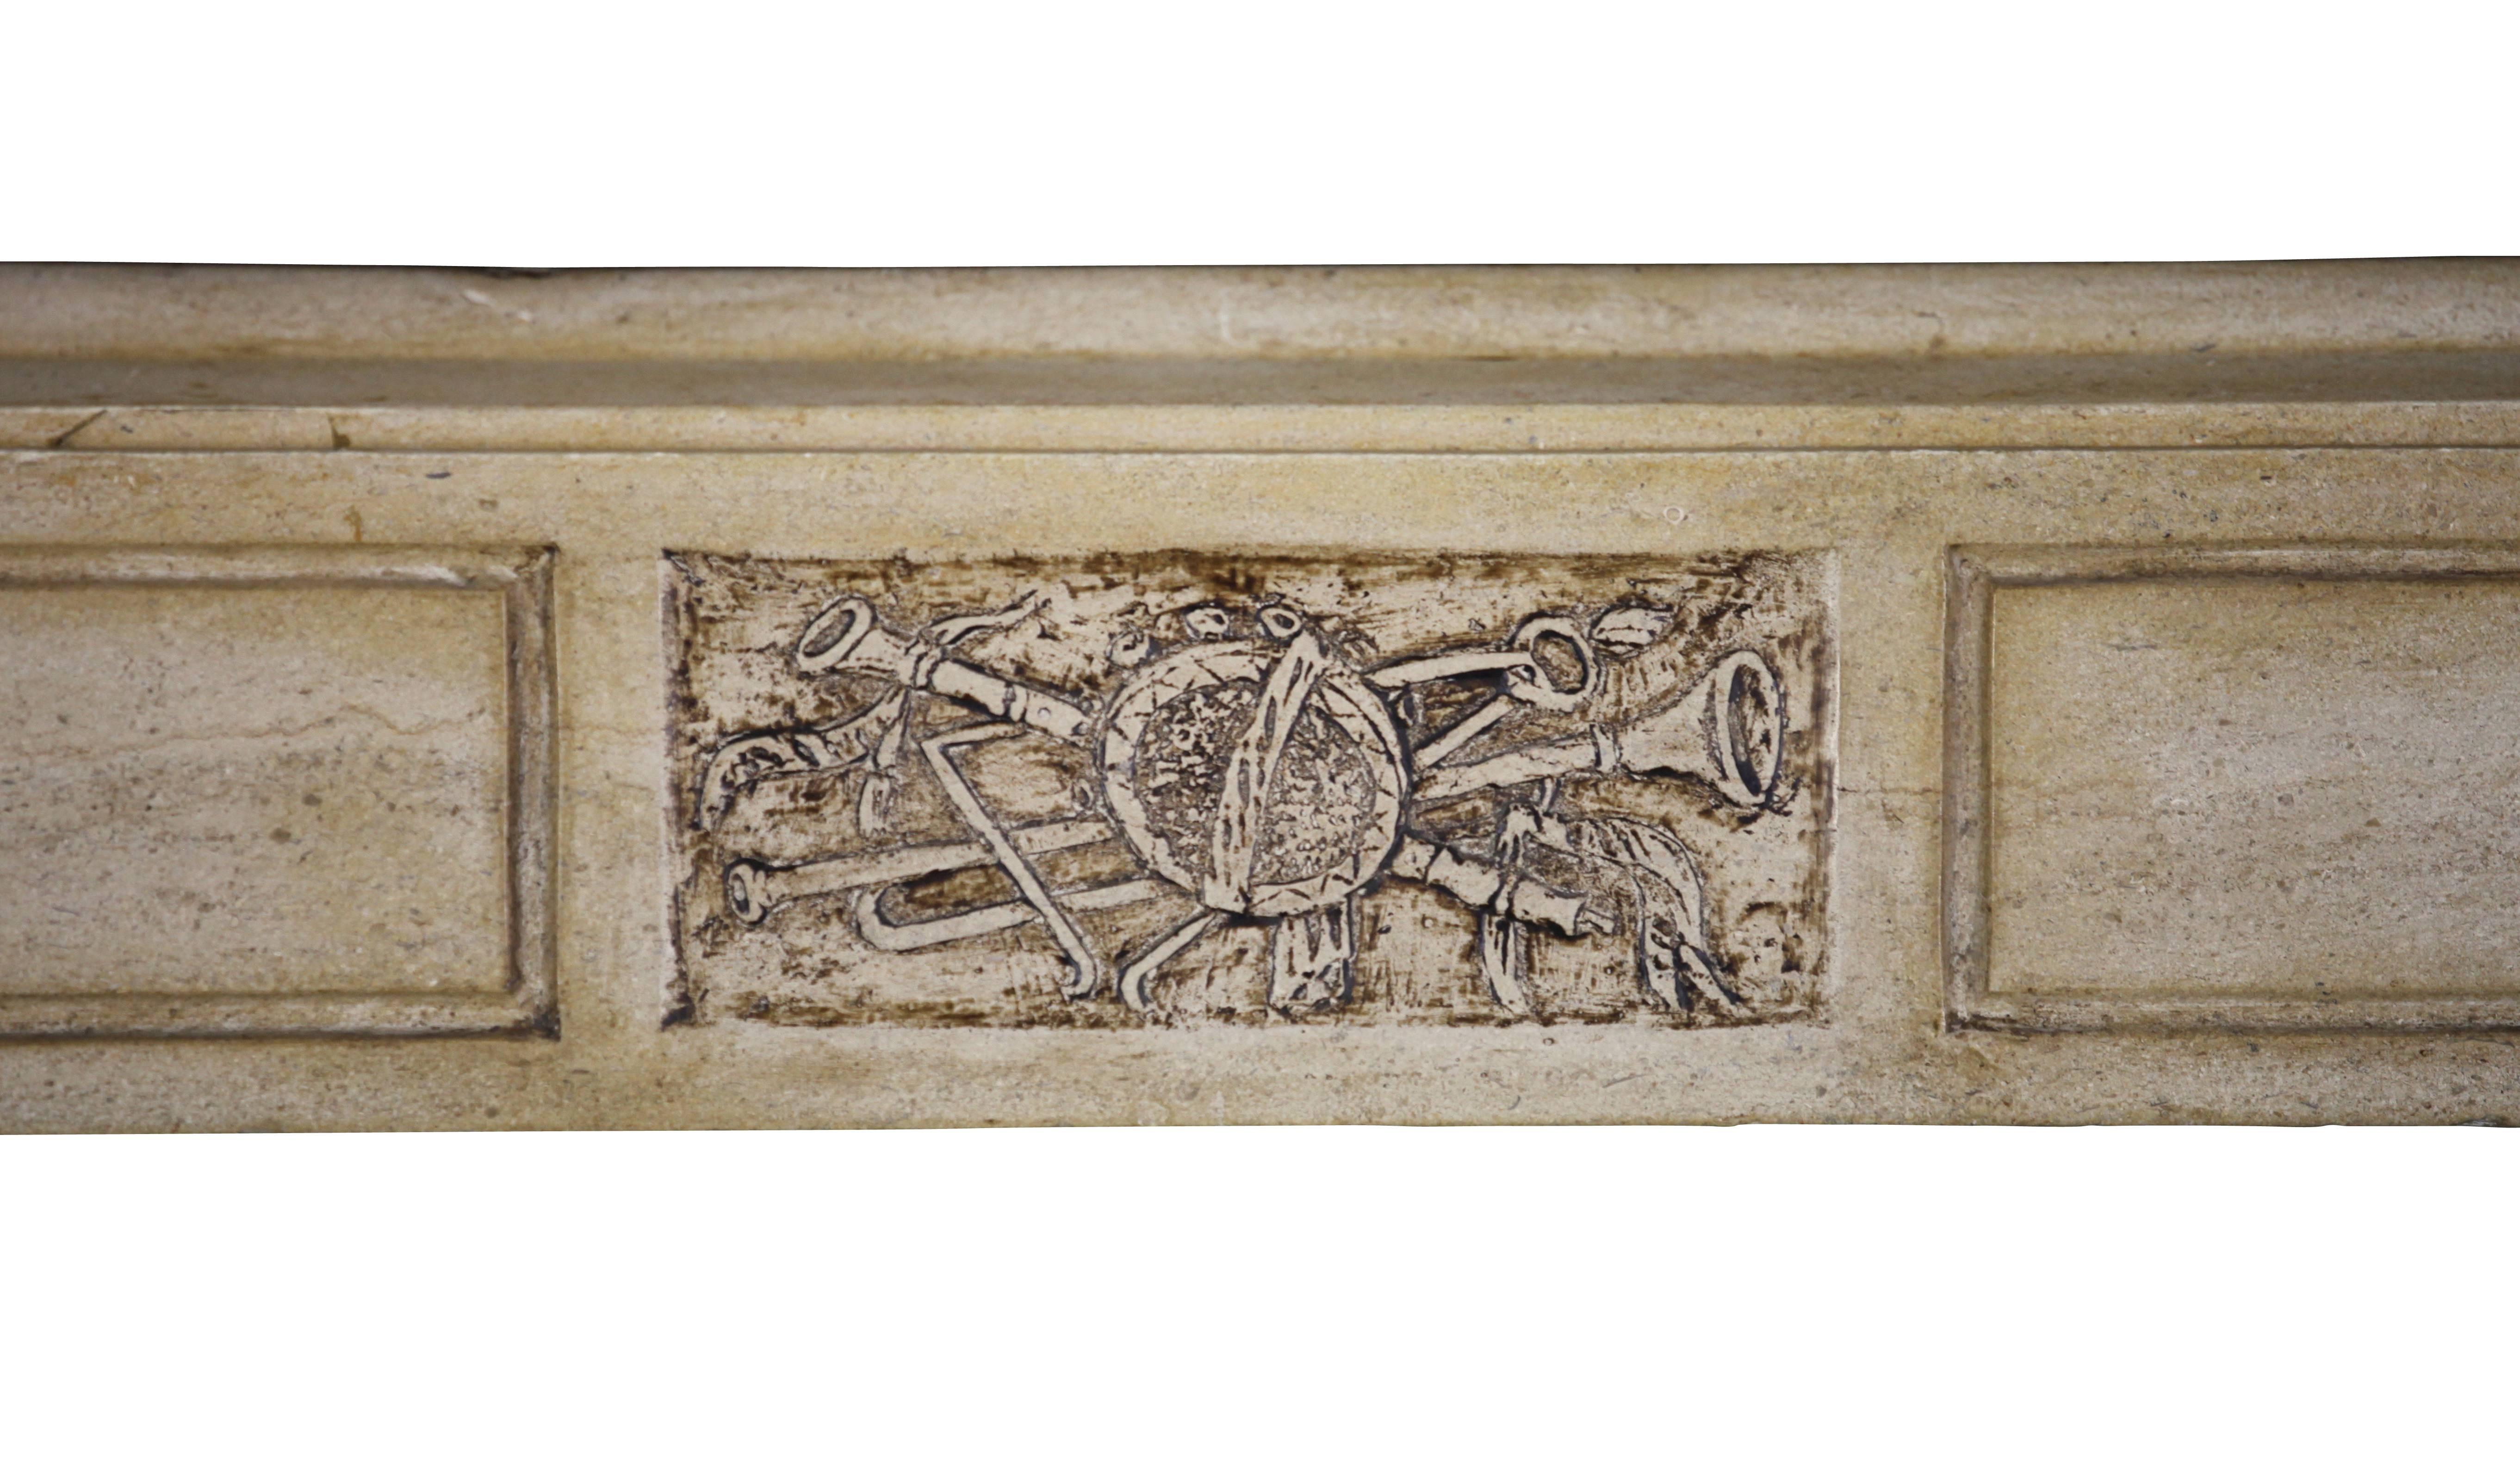 Authentic fireplace surround from the Burgundy region with amazing  cartouche in the center of the fronton: Details of music instruments. This mantel has also a very nice patina. 
Measurements:
140 cm Exterior Width 55,13 Inch
108 cm Exterior Height